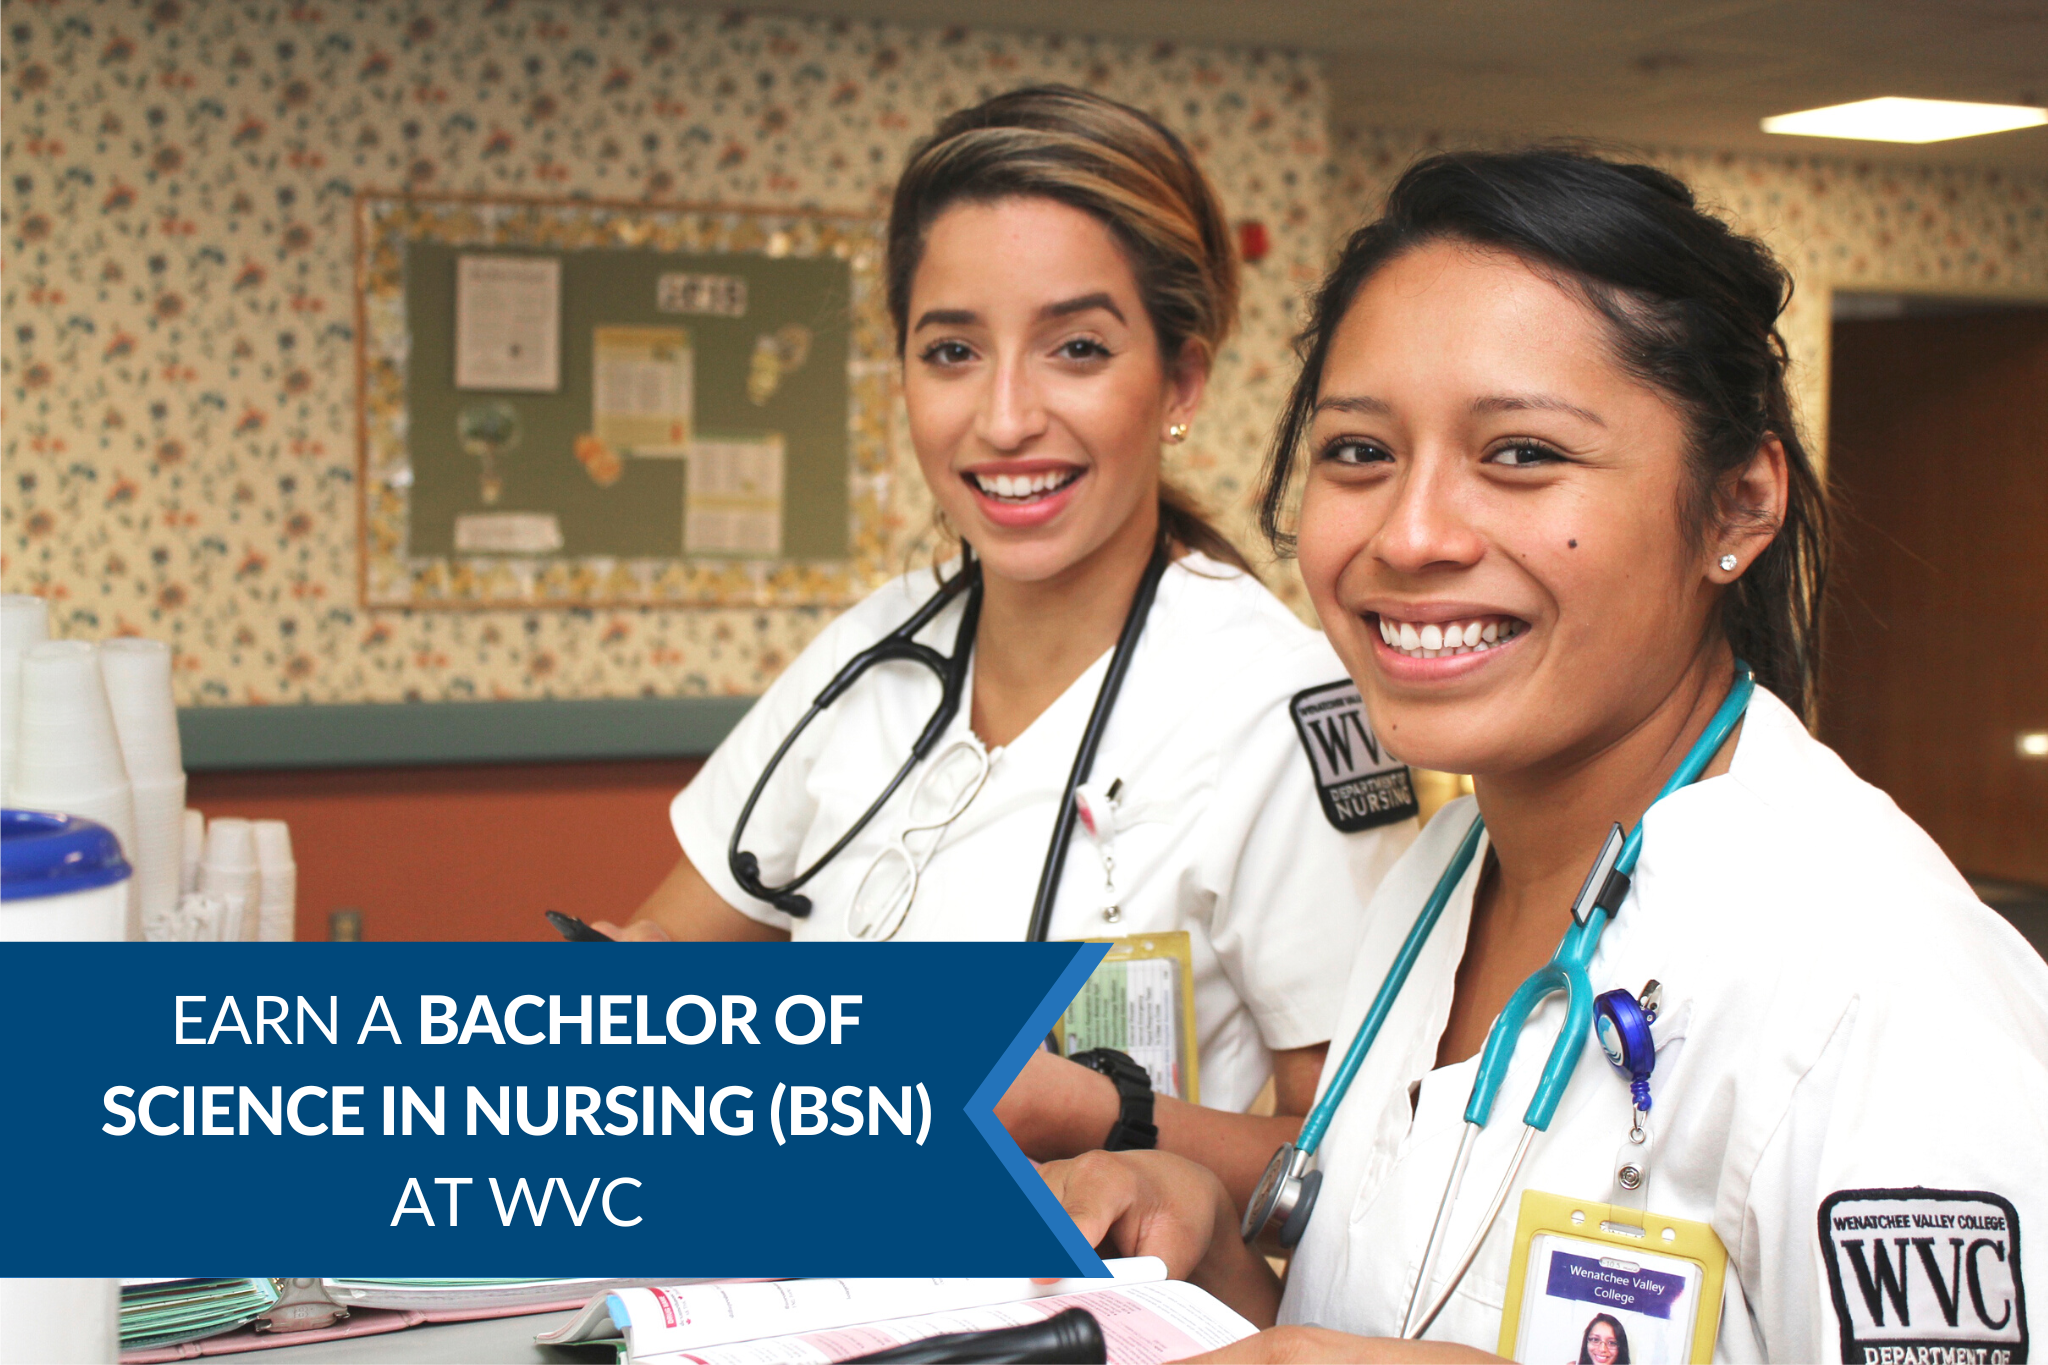 Two nursing students and text that says "earn your Bachelor of Science of Nursing (BSN) at WVC"